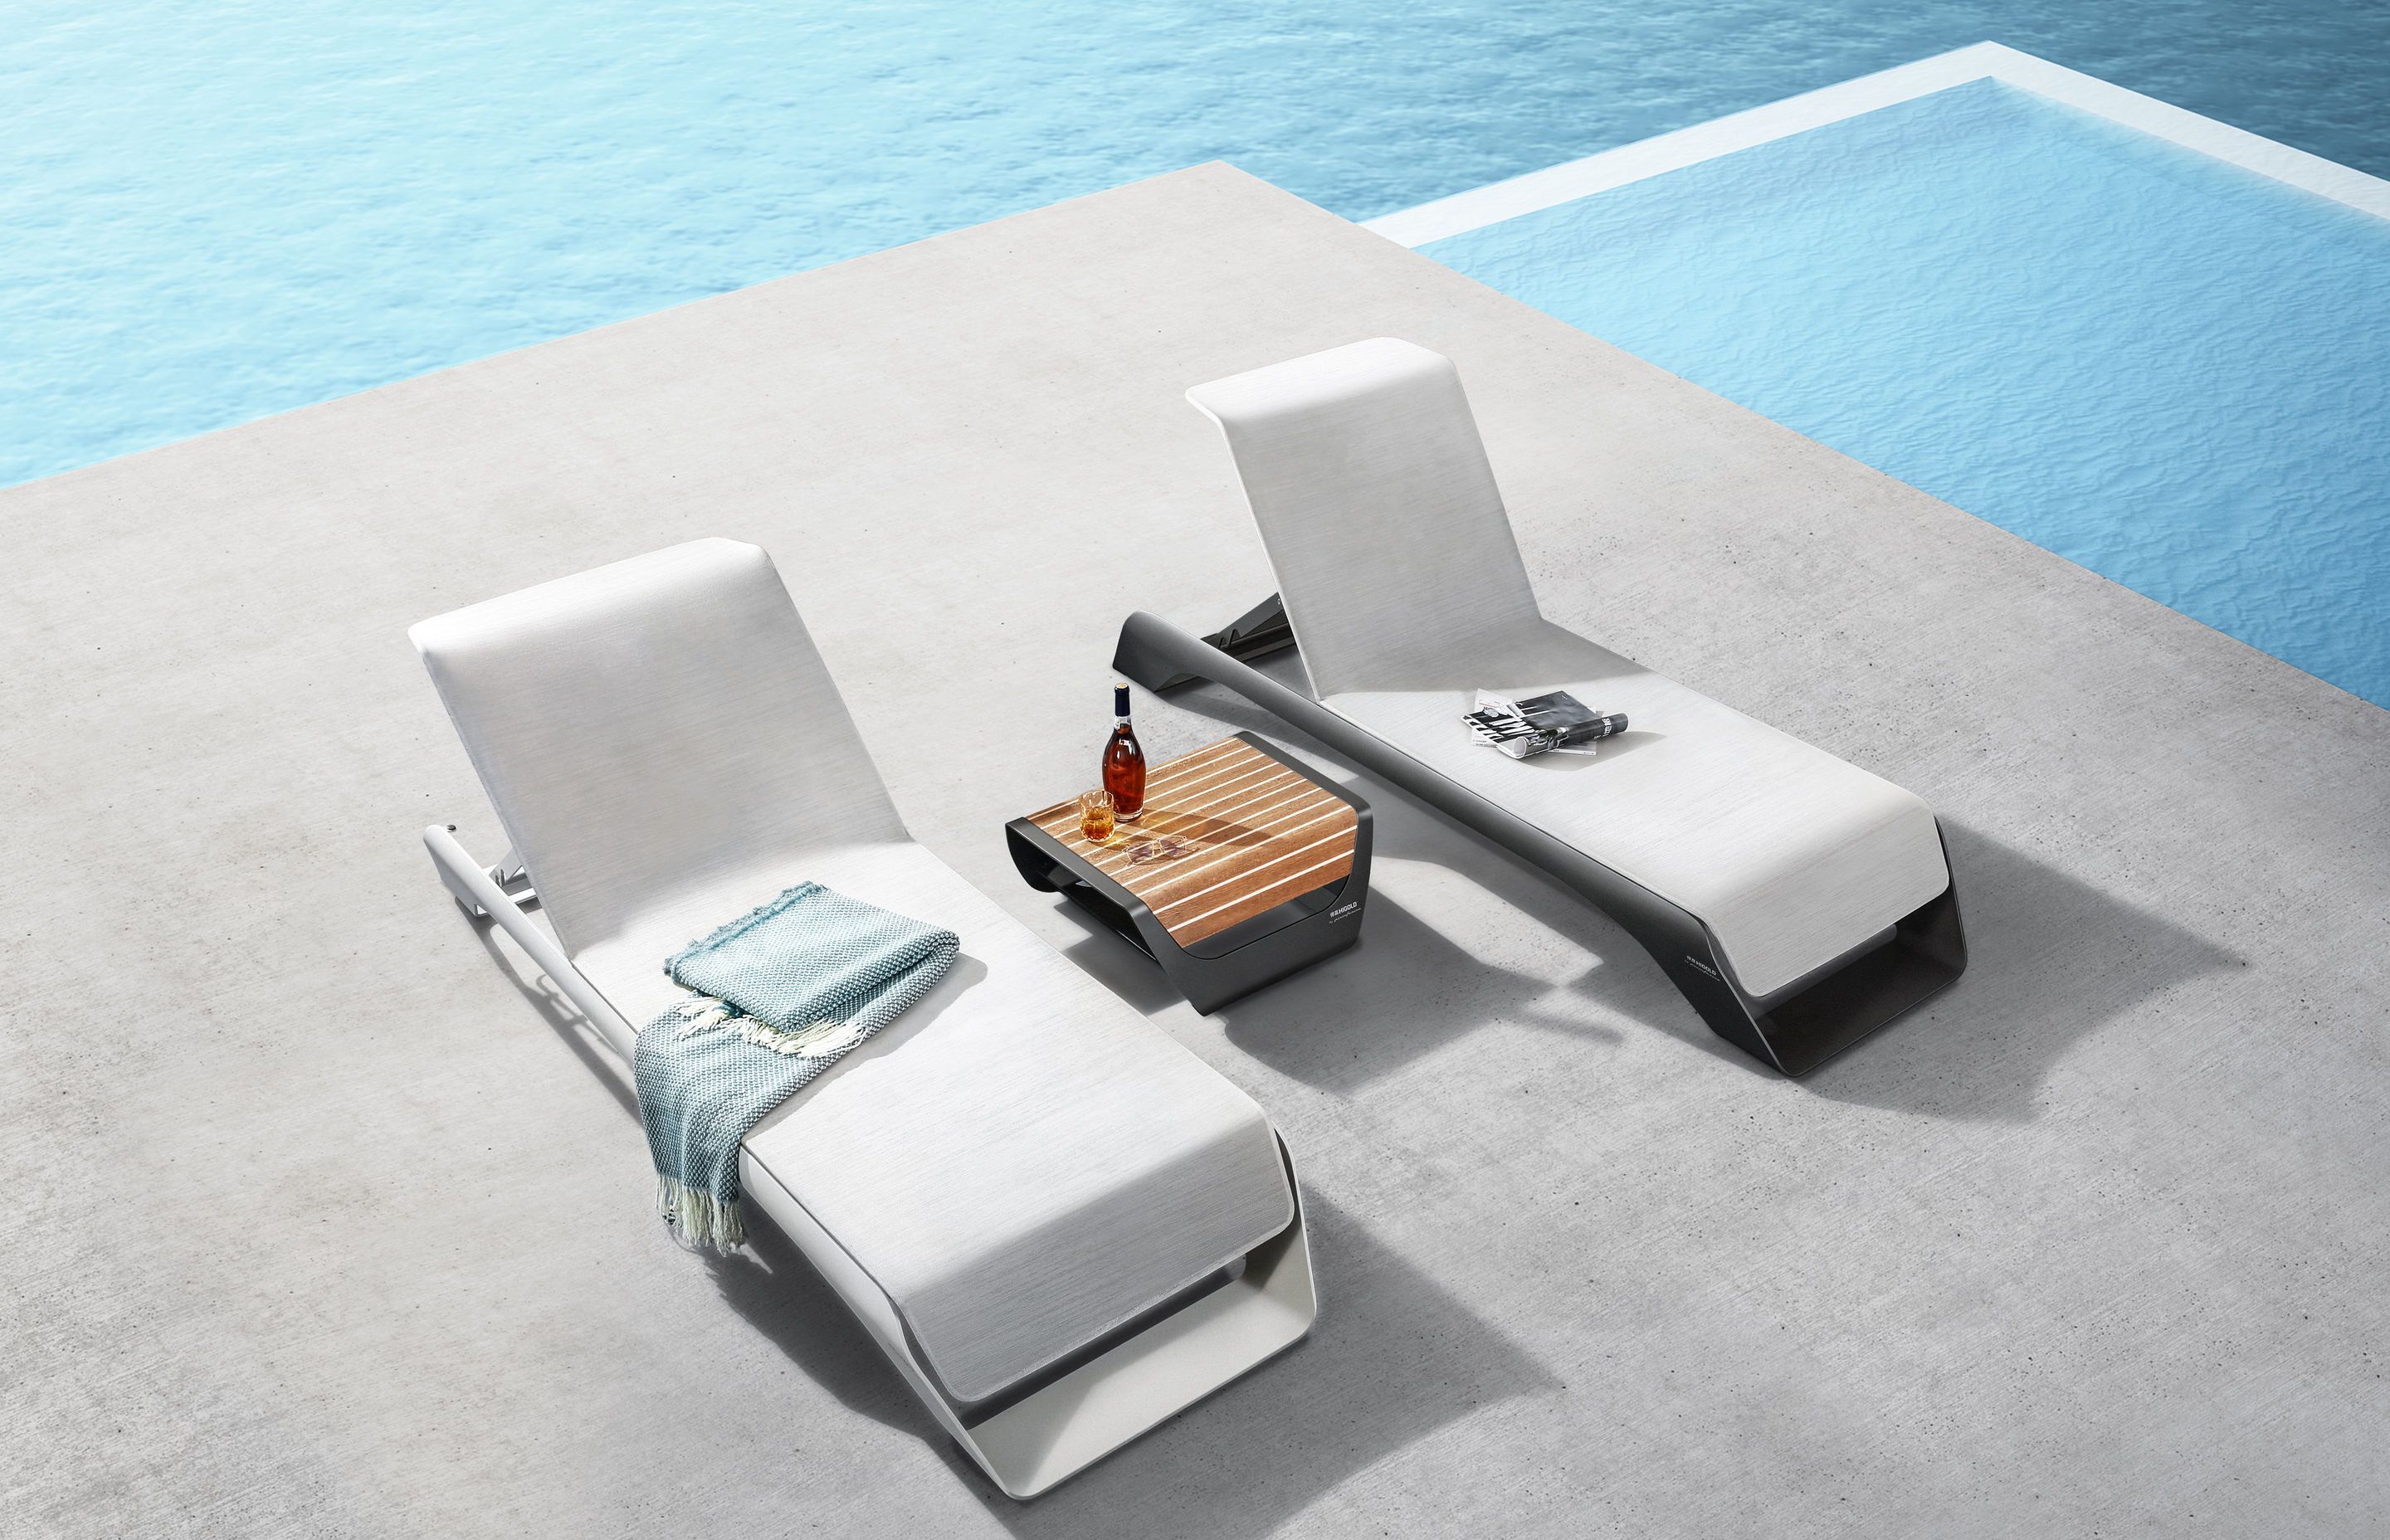 The award-winning Onda Sunlounger is a high-end sunbed is designed and developed by Higold and Pininfarina.